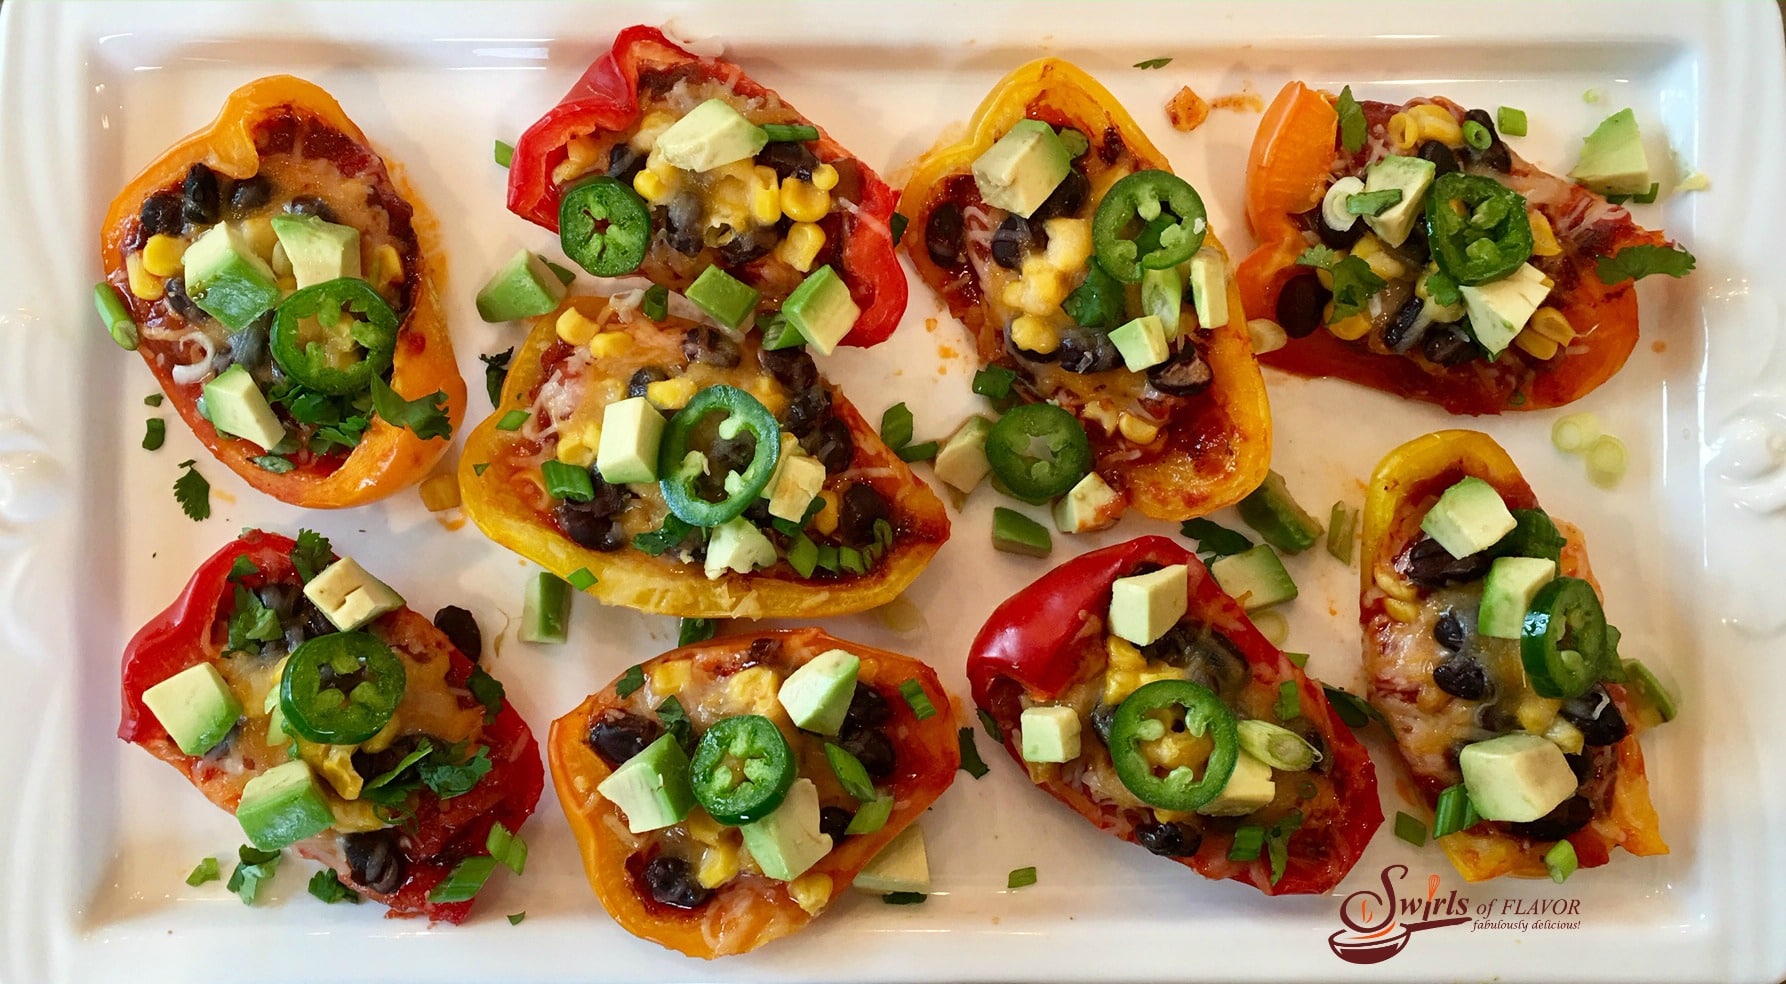 Spicy Nacho Stuffed Peppers are seasoned withÂ taco seasoningÂ and brimming with salsa, black beans, corn, avocado, jalapeno and cheesyÂ goodness!Â #nachos #easyrecipe #appetizer #nachosrecipe #lowfat #glutenfree #cheese #stuffedpeppers #swirlsofflavor